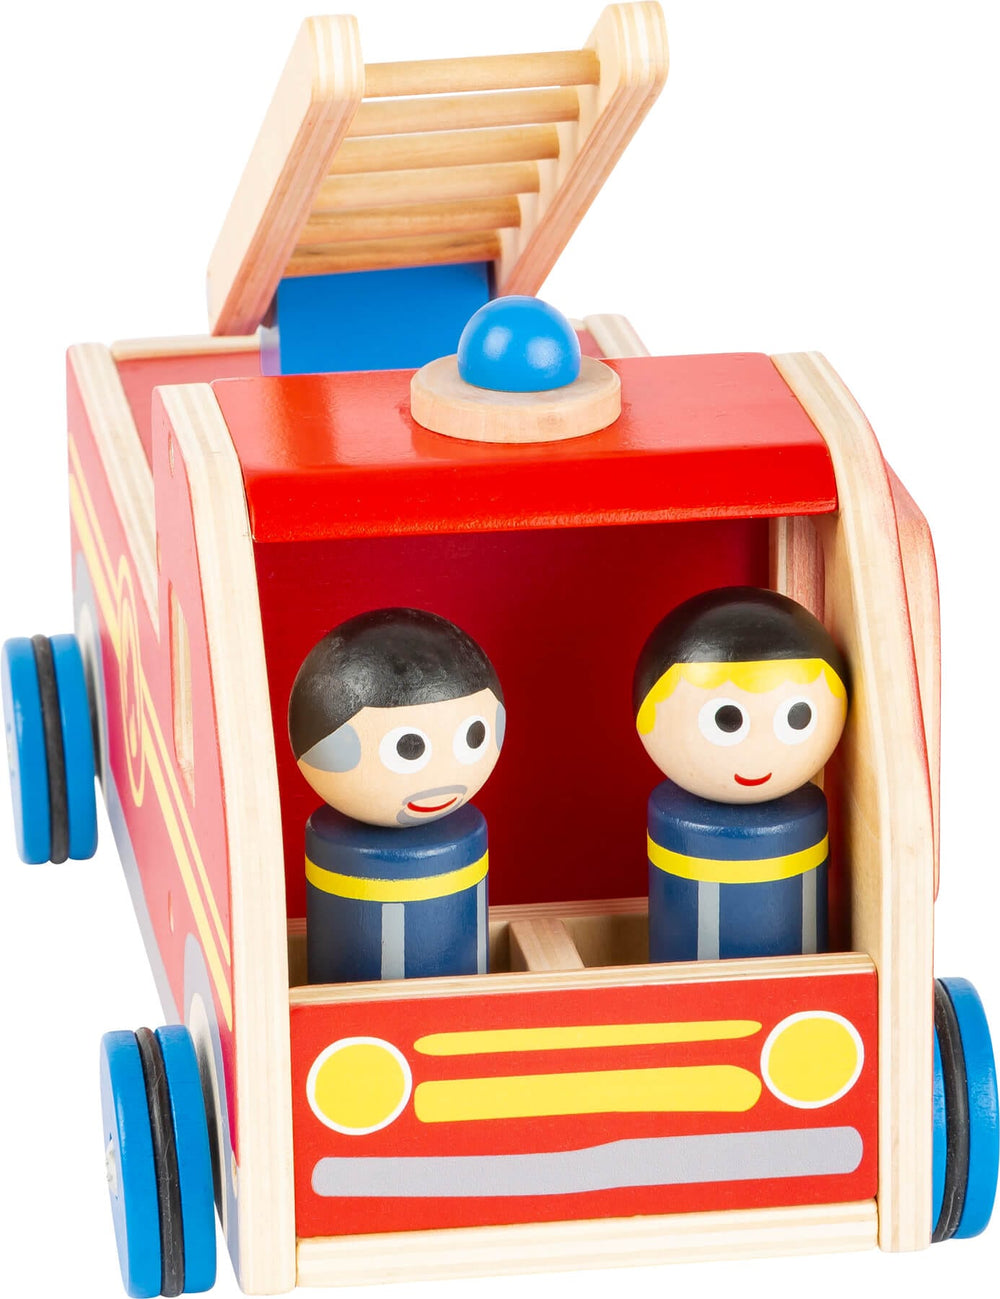 Small Foot XL Toy Fire Engine with peg dolls